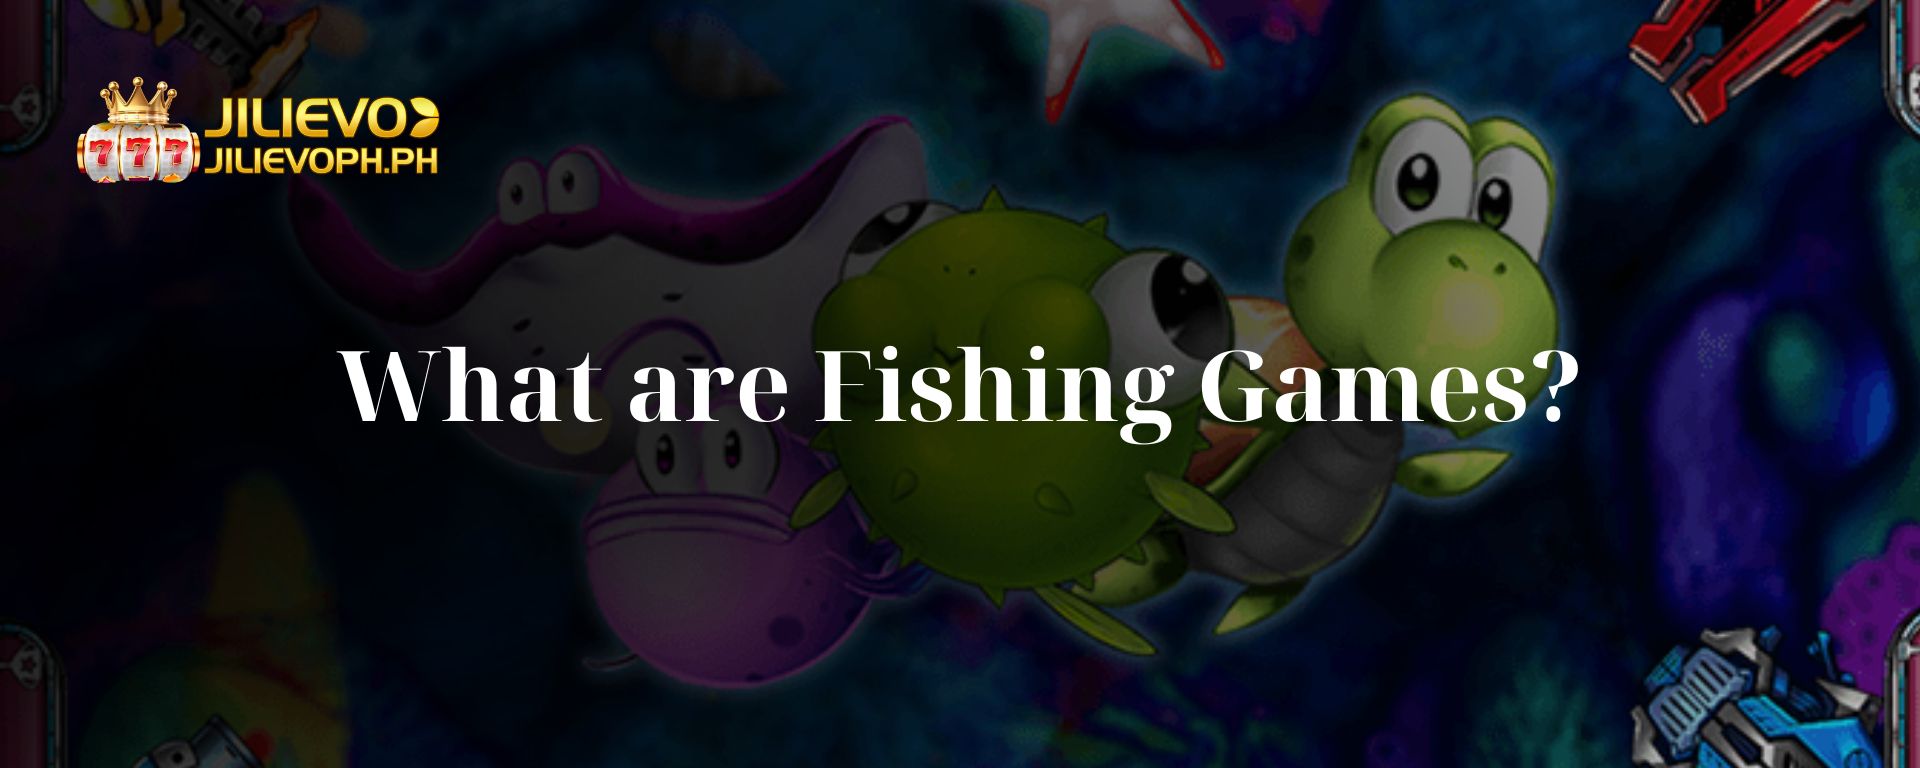 What are Fishing Games?